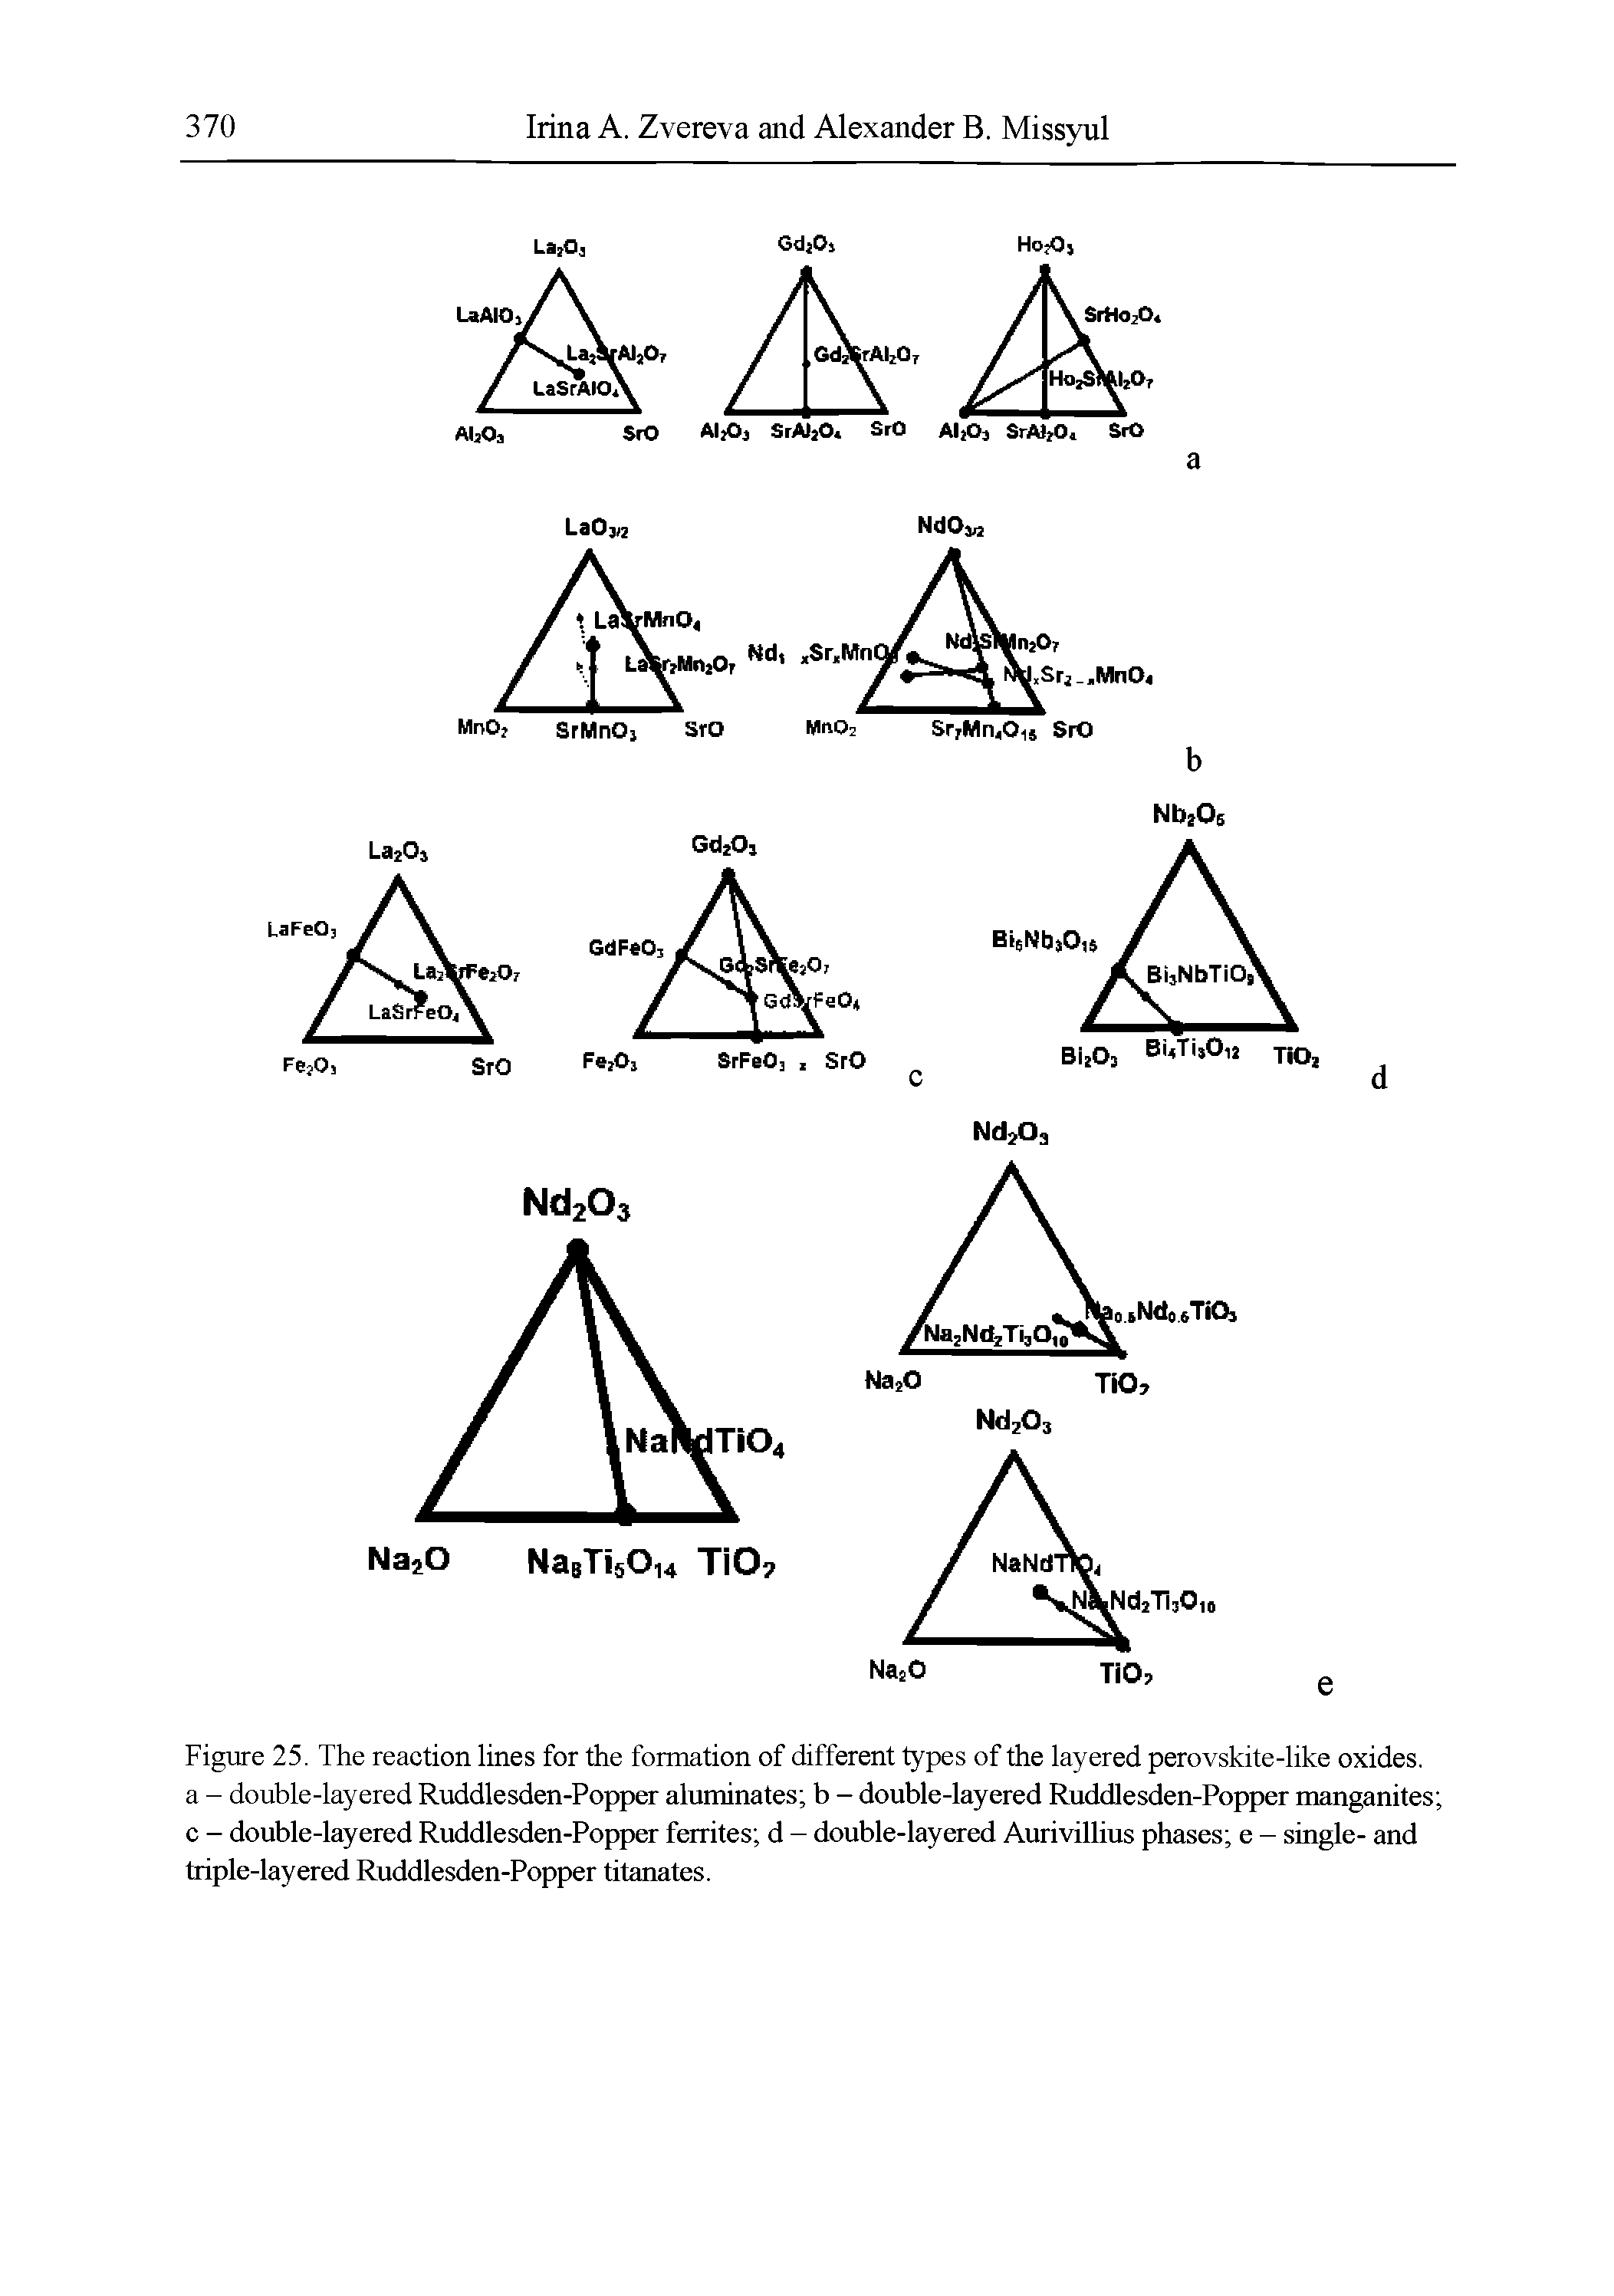 Figure 25. The reaction lines for the formation of different types of the layered perovskite-like oxides, a - double-layered Ruddlesden-Popper aluminates b - double-layered Ruddlesden-Popper manganites c - double-layered Ruddlesden-Popper ferrites d - double-layered Aurivillius phases e - single- and triple-layered Ruddlesden-Popper titanates.